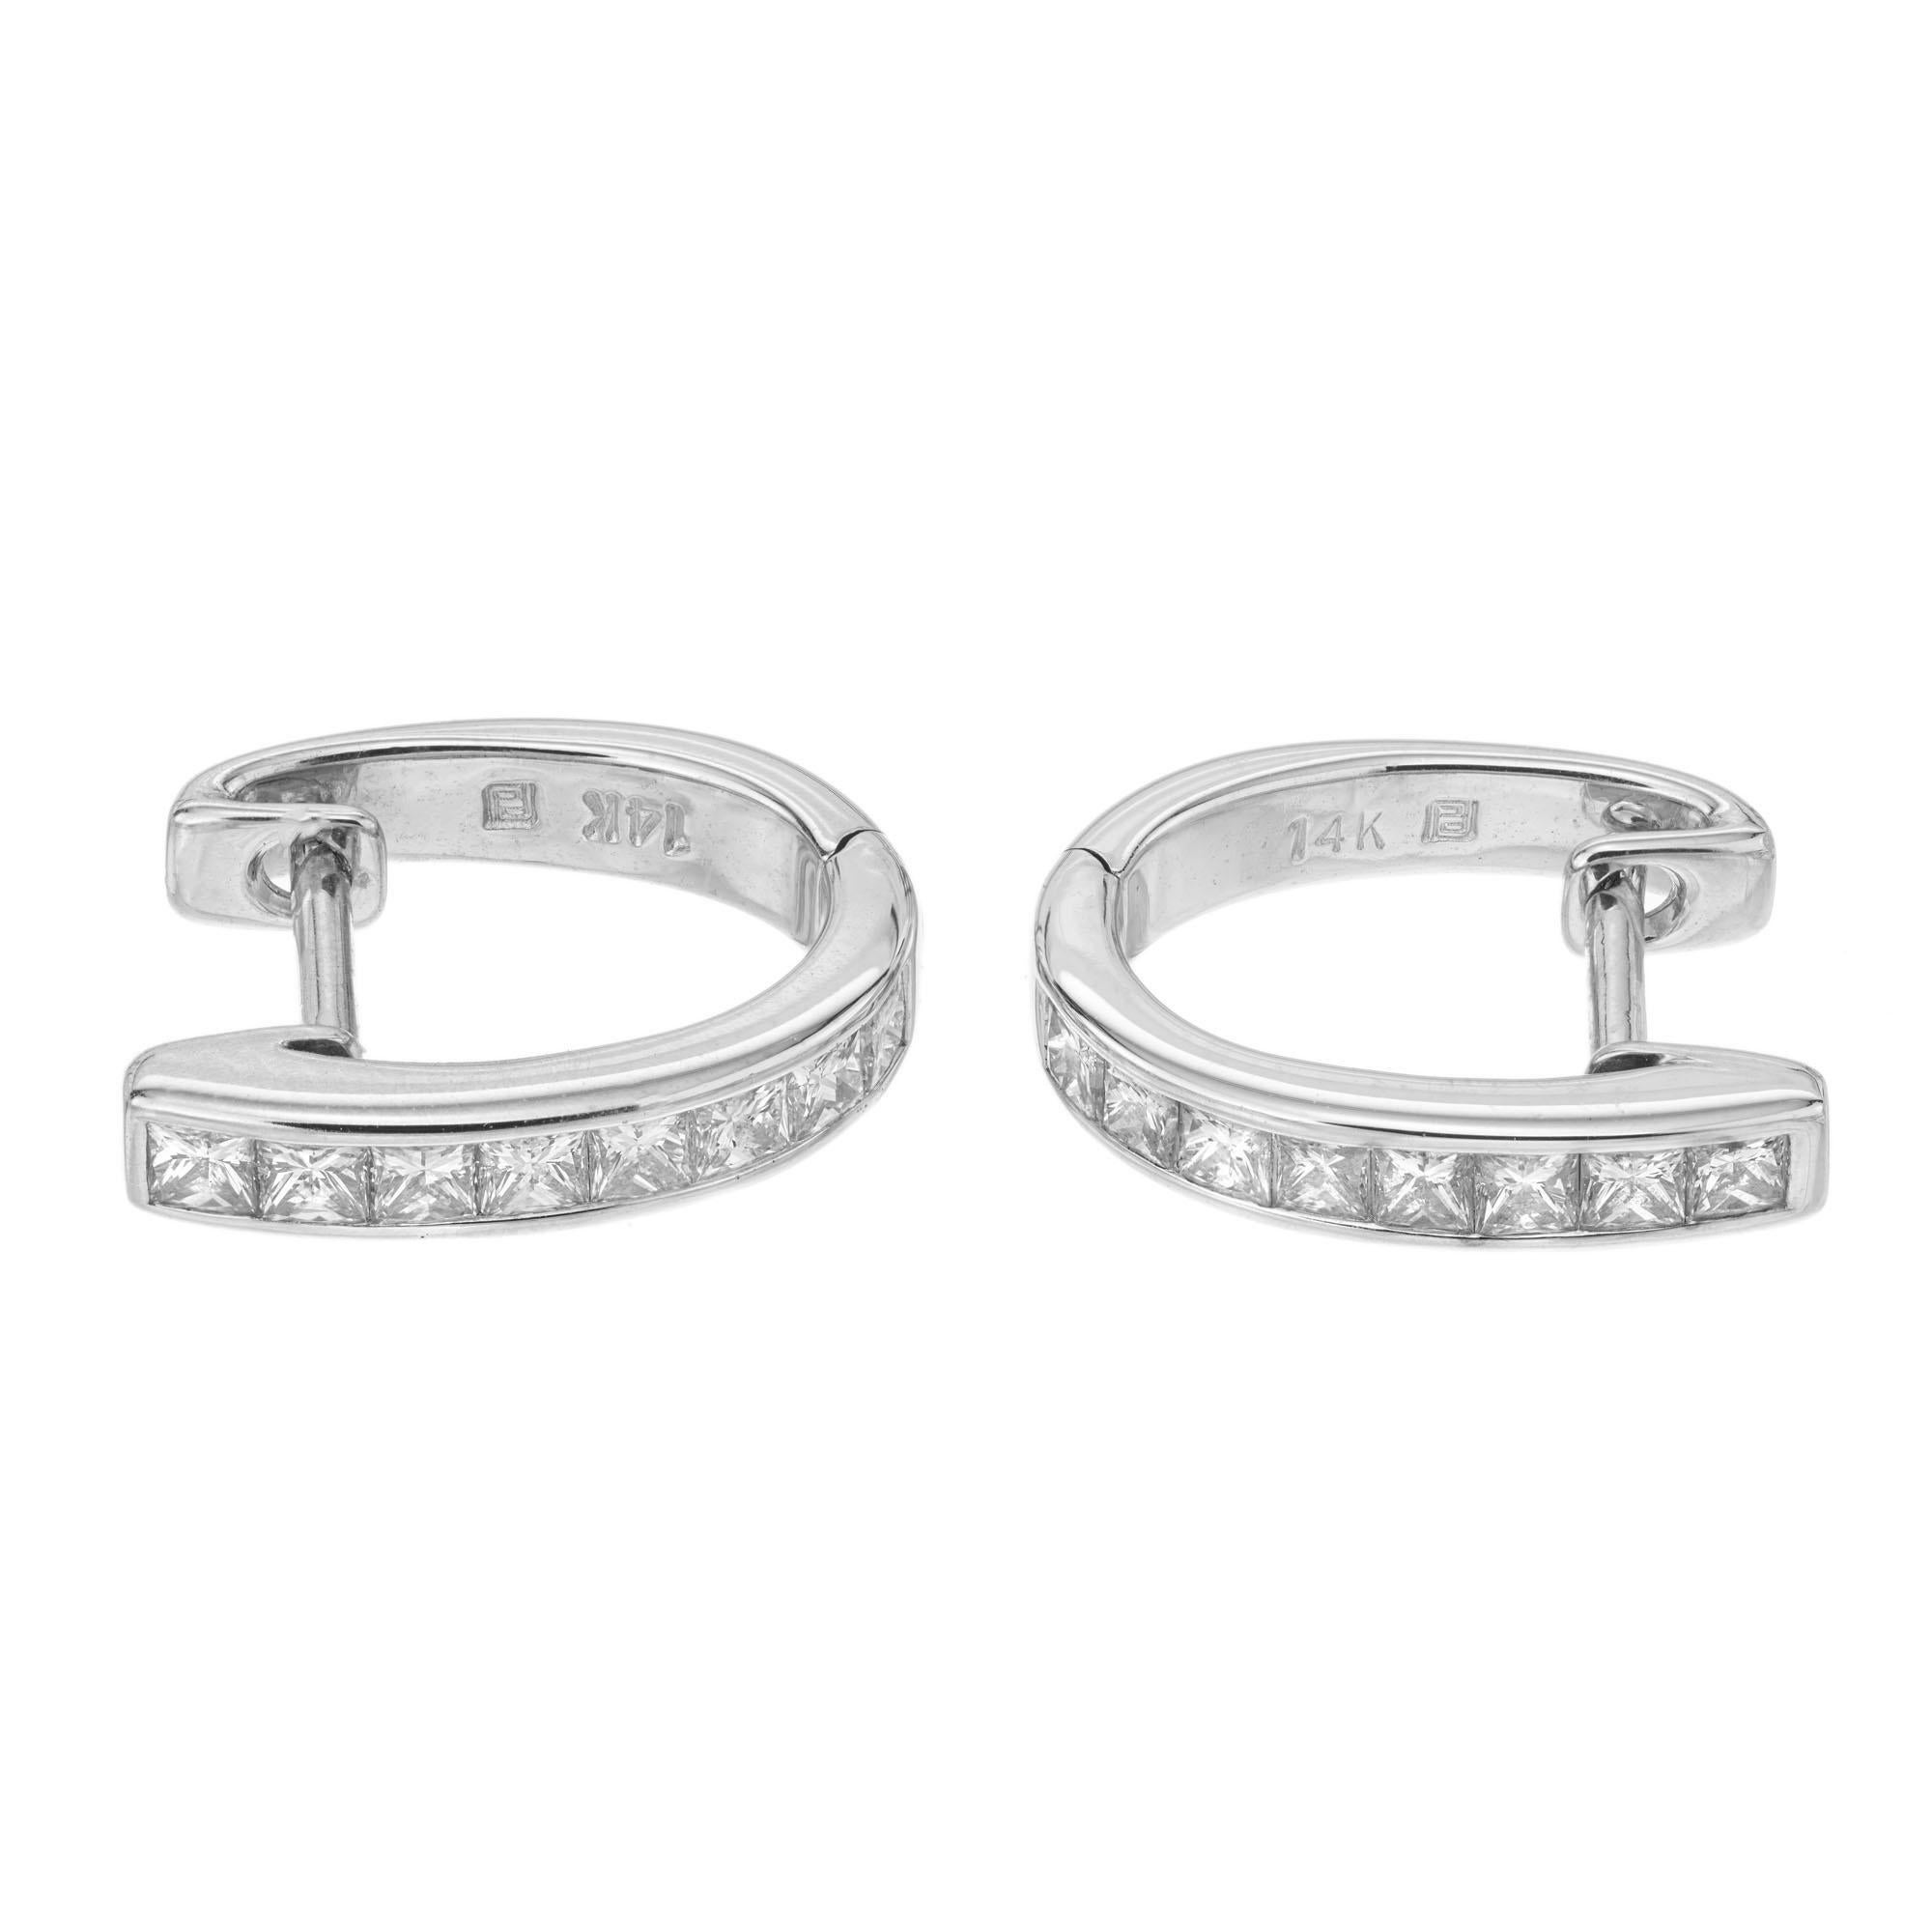 Simple .50 carat princess cut diamond huggie earrings in 14k white gold.

16 princess cut diamonds, H-I VS approx. .50cts
14k white gold 
Stamped: 14k
2.4 grams
Top to bottom: 13.4mm or .5 Inch
Width: 2.8mm or 1/8 Inch
Depth or thickness: 1.8mm 
